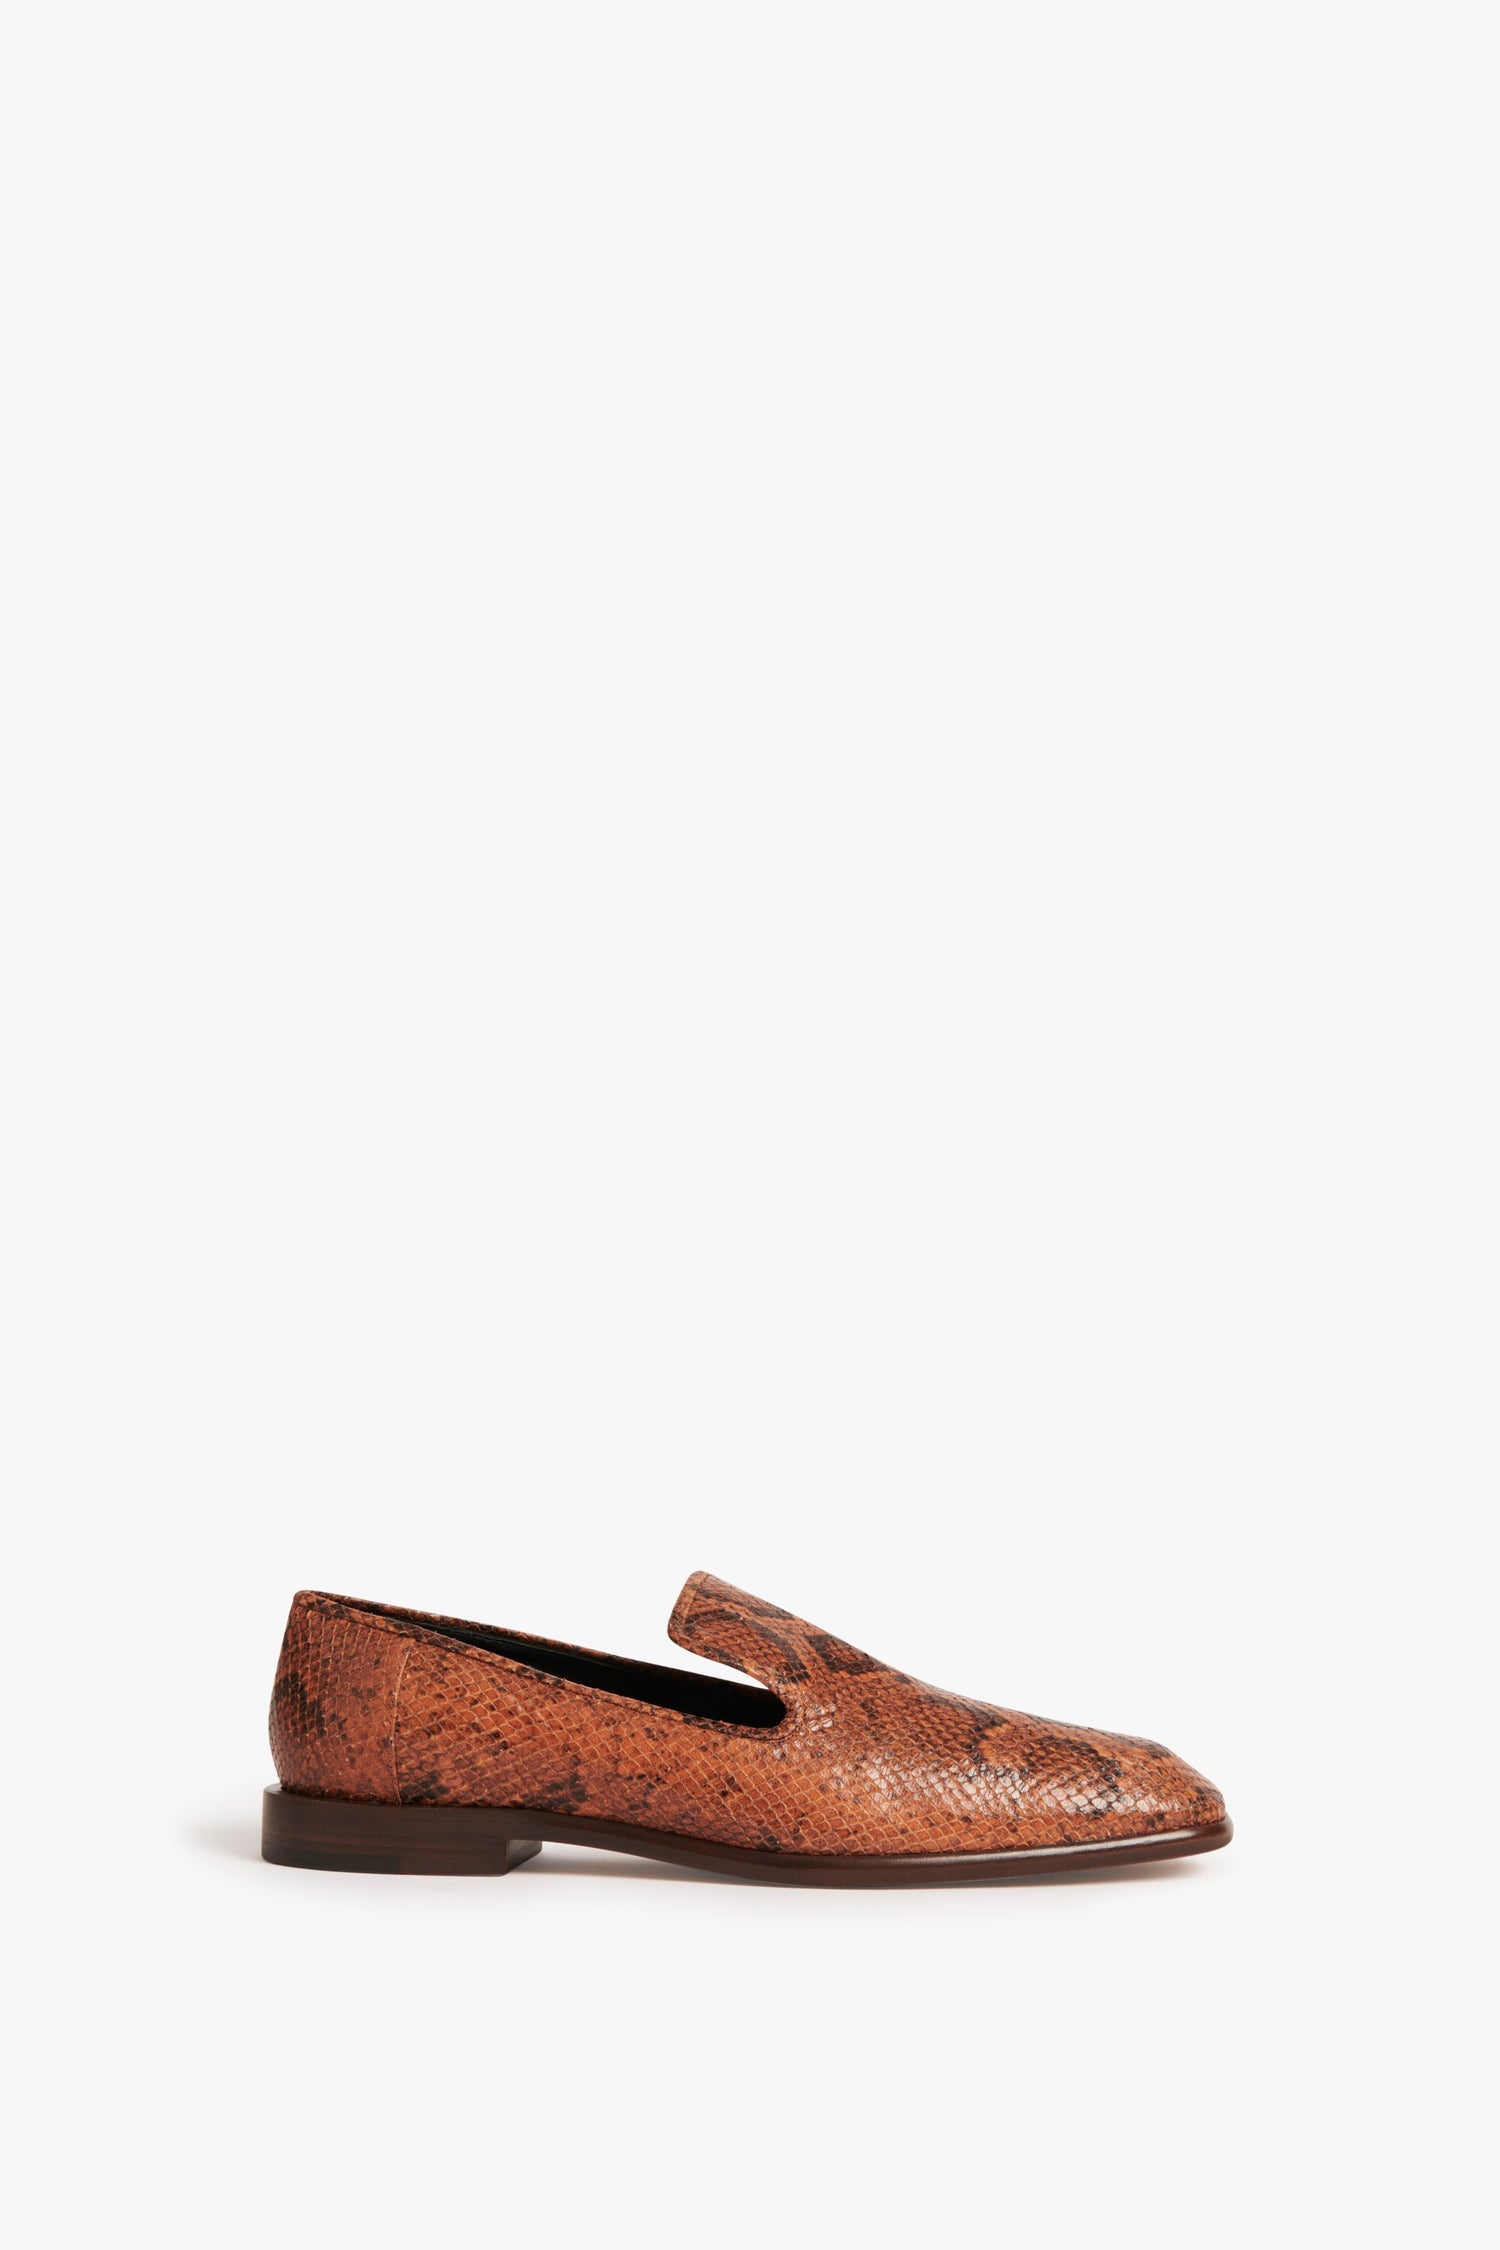 A single traditional brown snakeskin loafer with a flat heel on a plain white background, epitomizing the sophisticated style of Spring Summer 2022, is replaced by the Hanna Loafer in Copper Snake Print by Victoria Beckham.